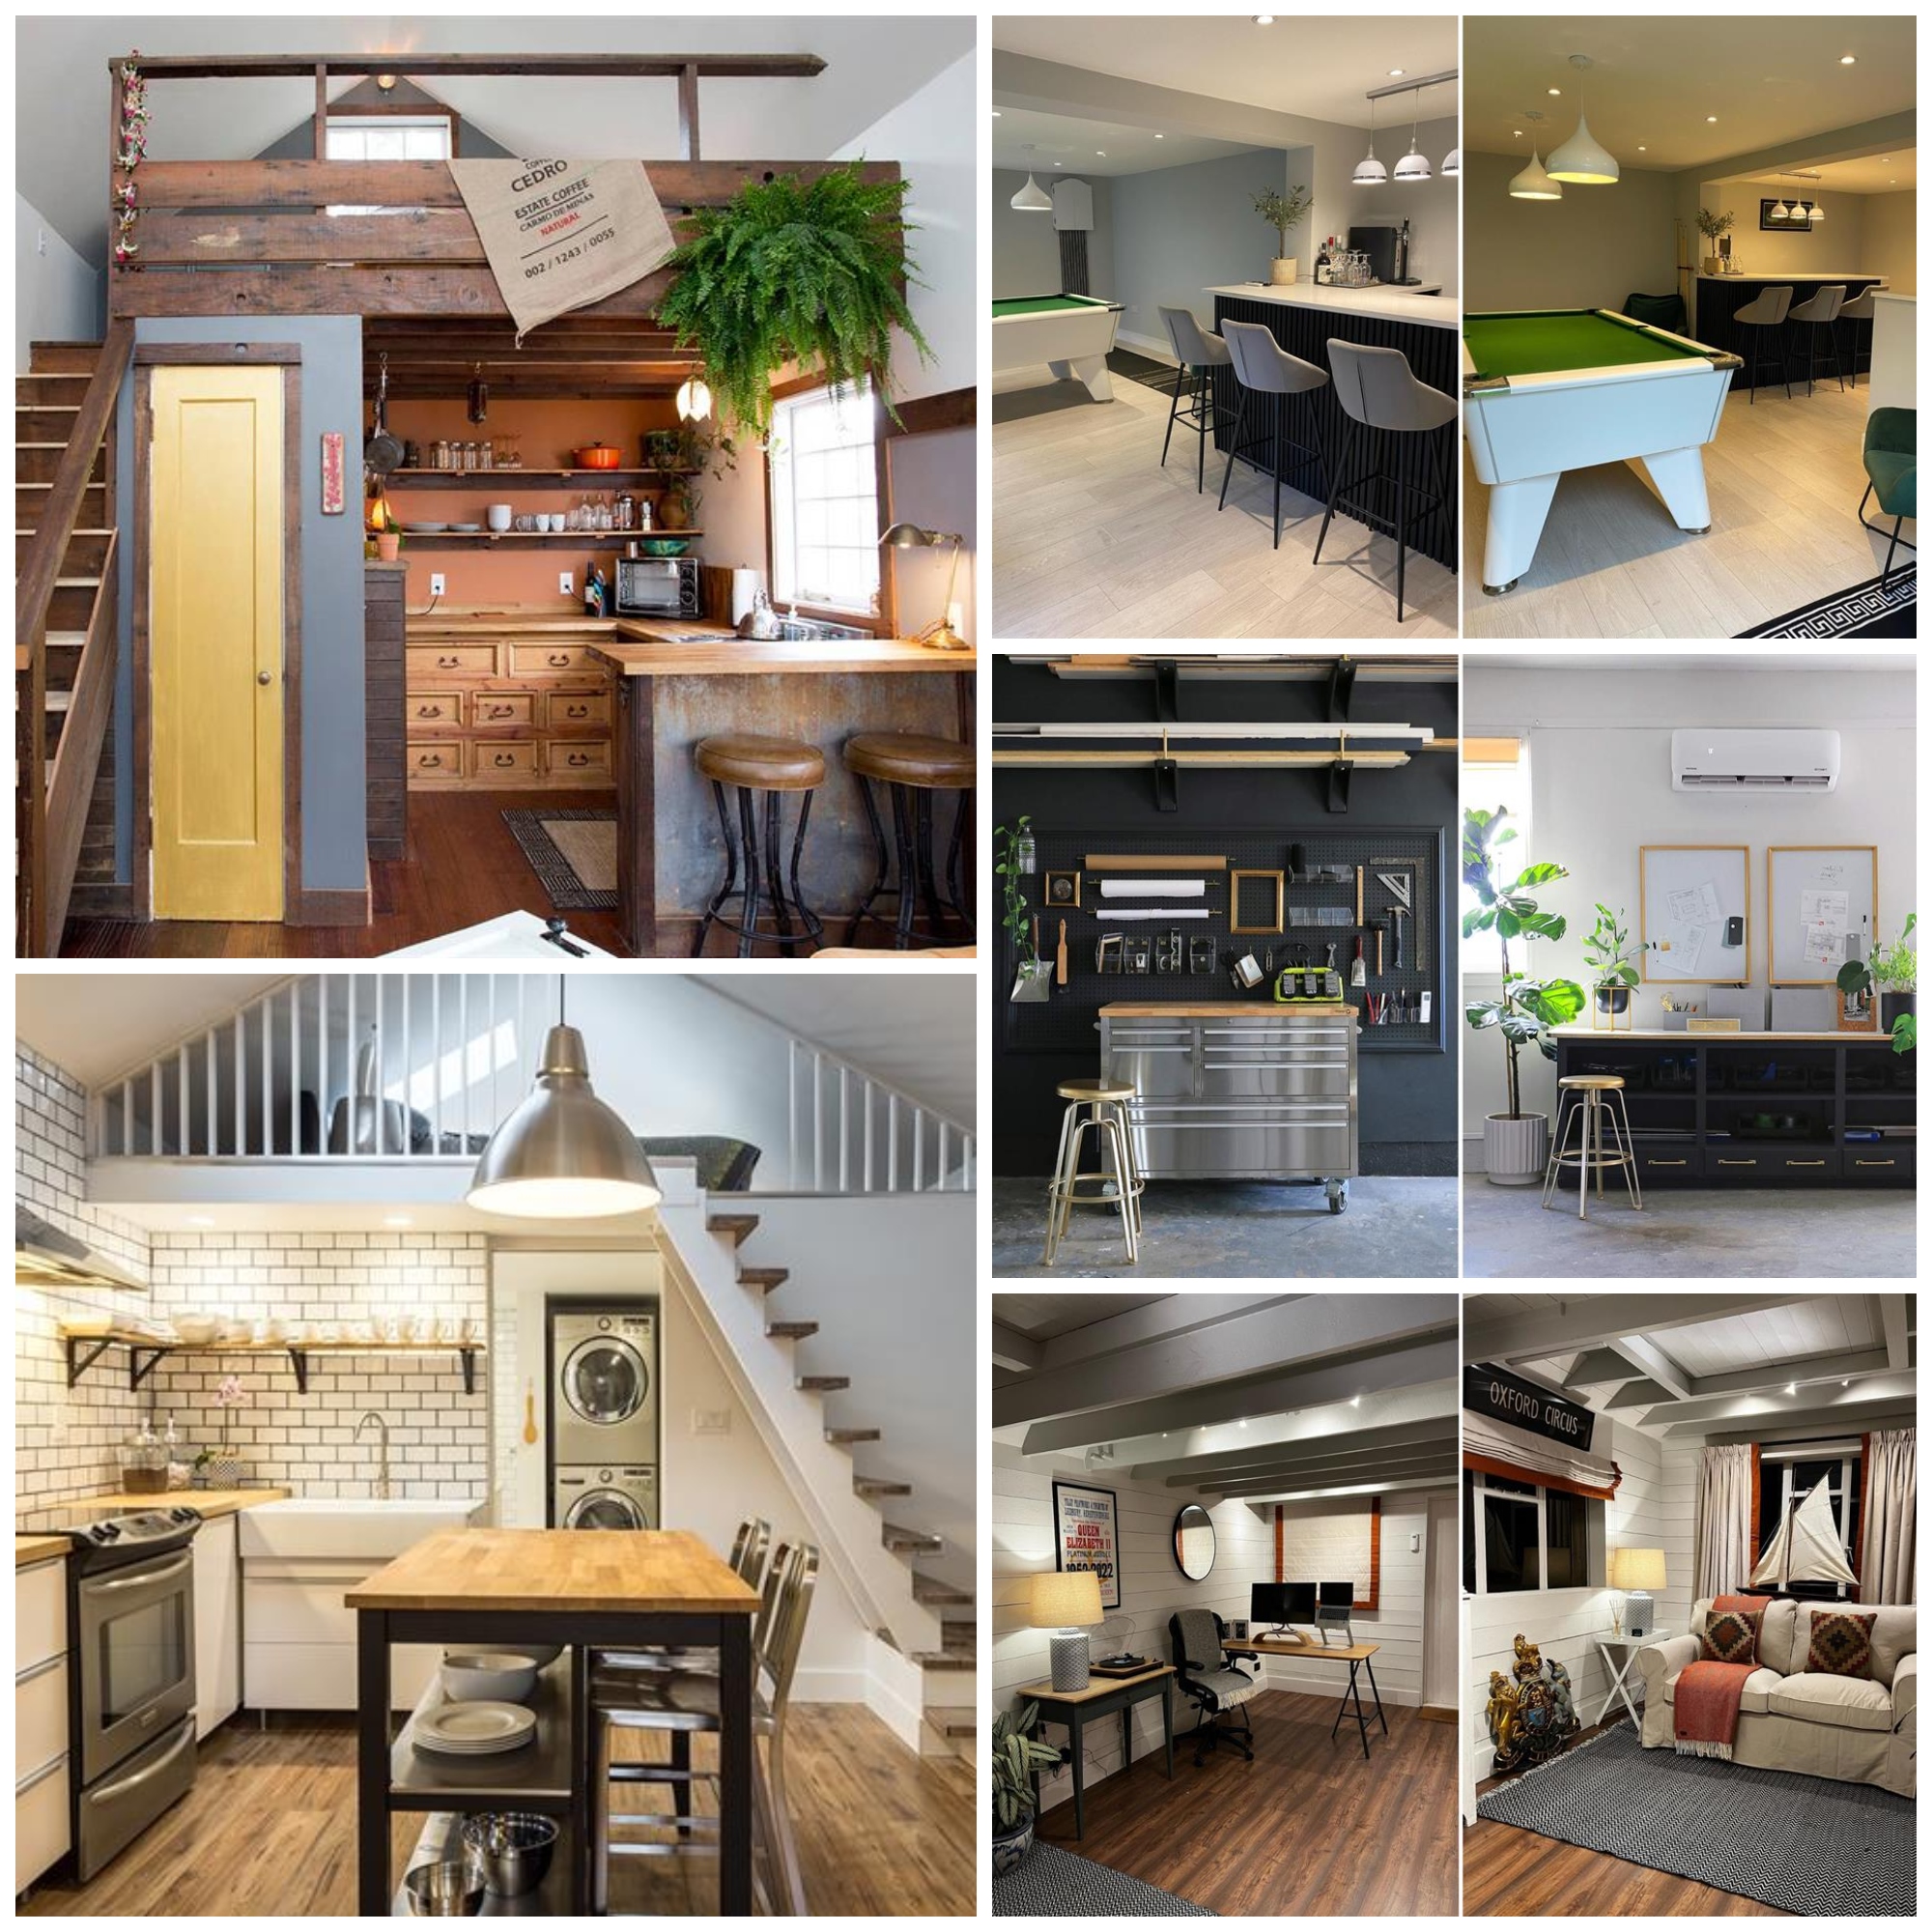 Garage Conversions Ideas: Unlocking the Potential of Your Sacramento Space